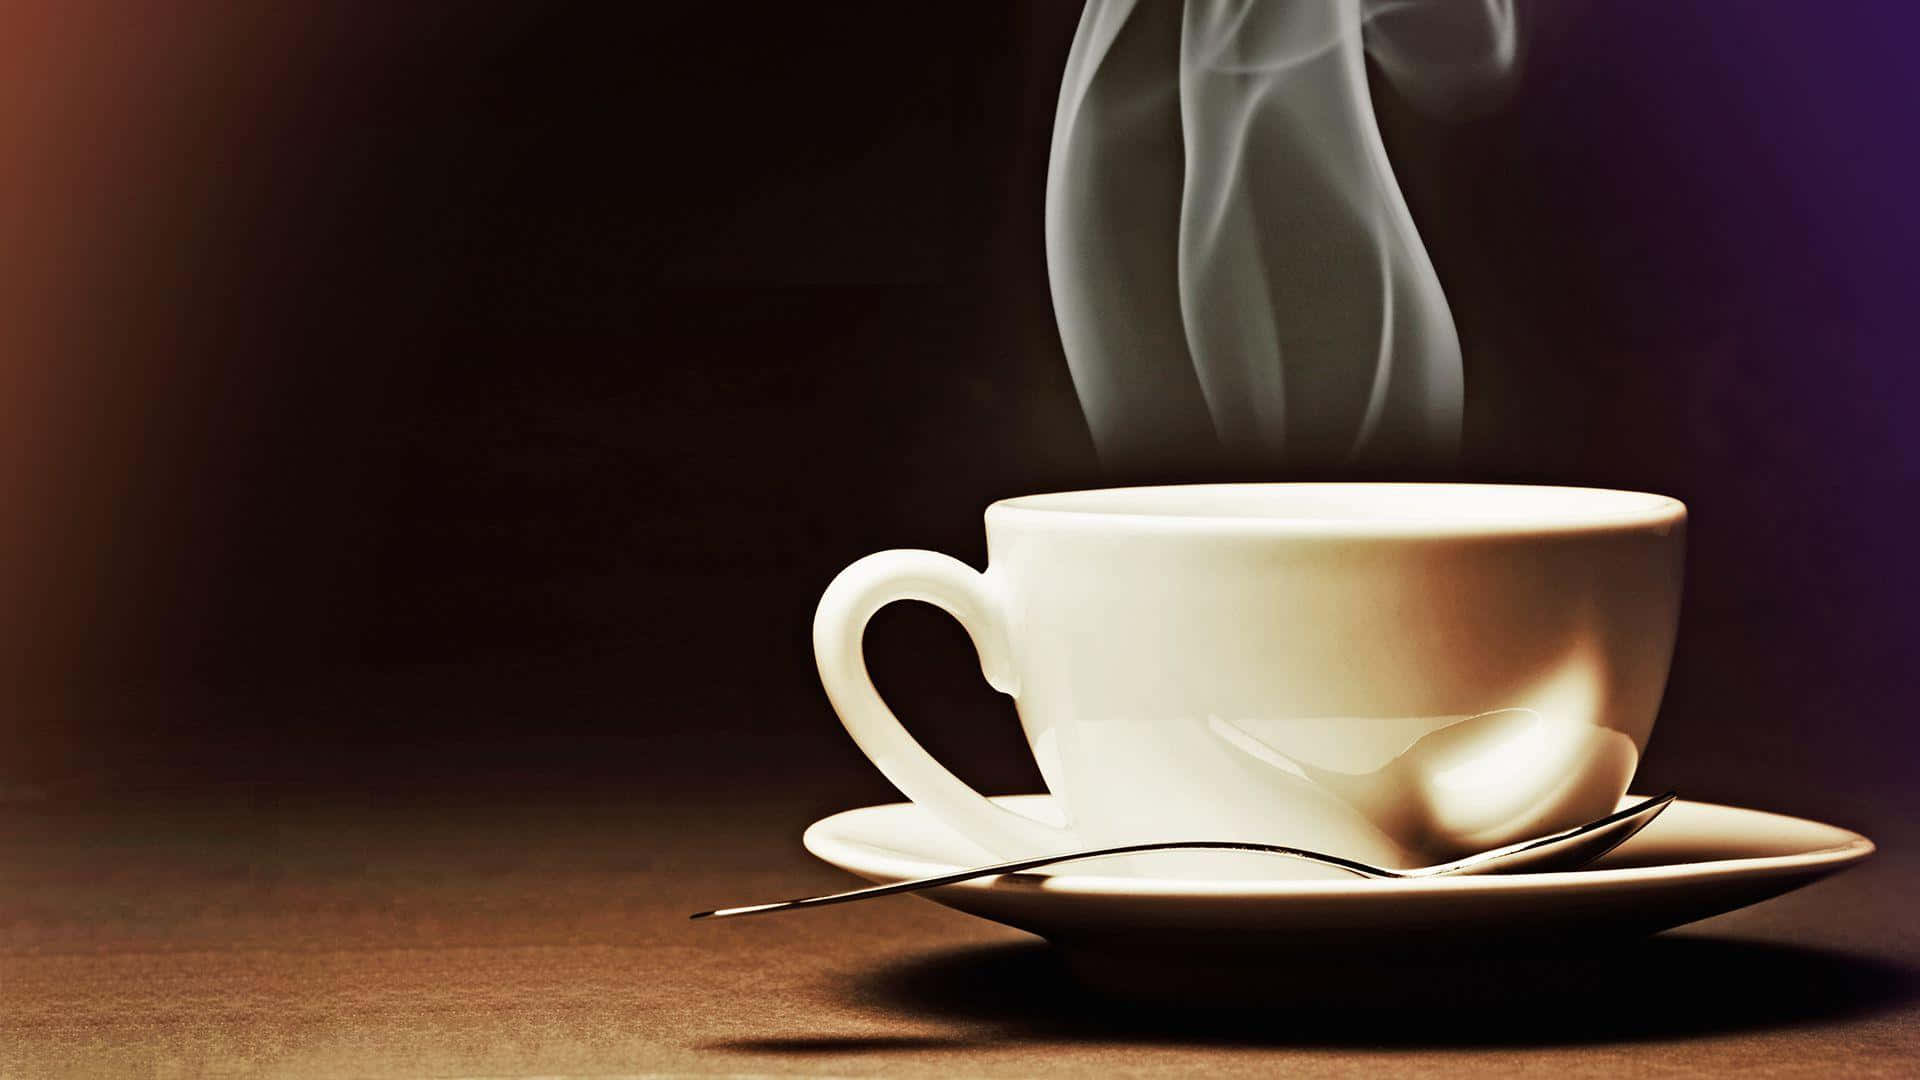 A Cup Of Coffee With Smoke Coming Out Of It